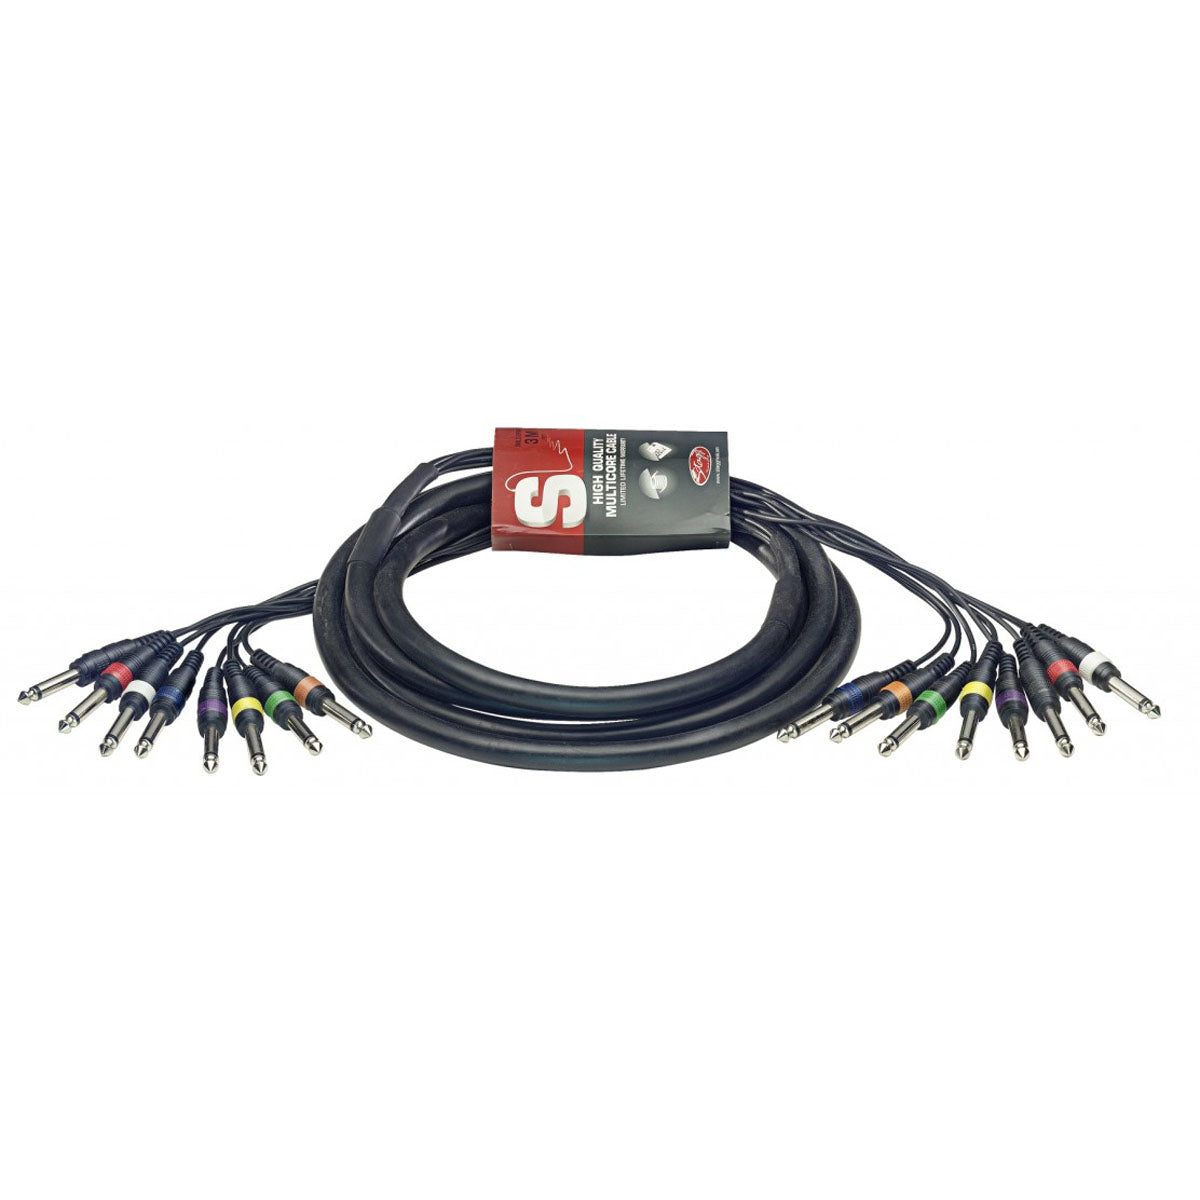 Stagg 3m Multicore Loom Cable - x8 1/4" Jack to x8 1/4" Jack